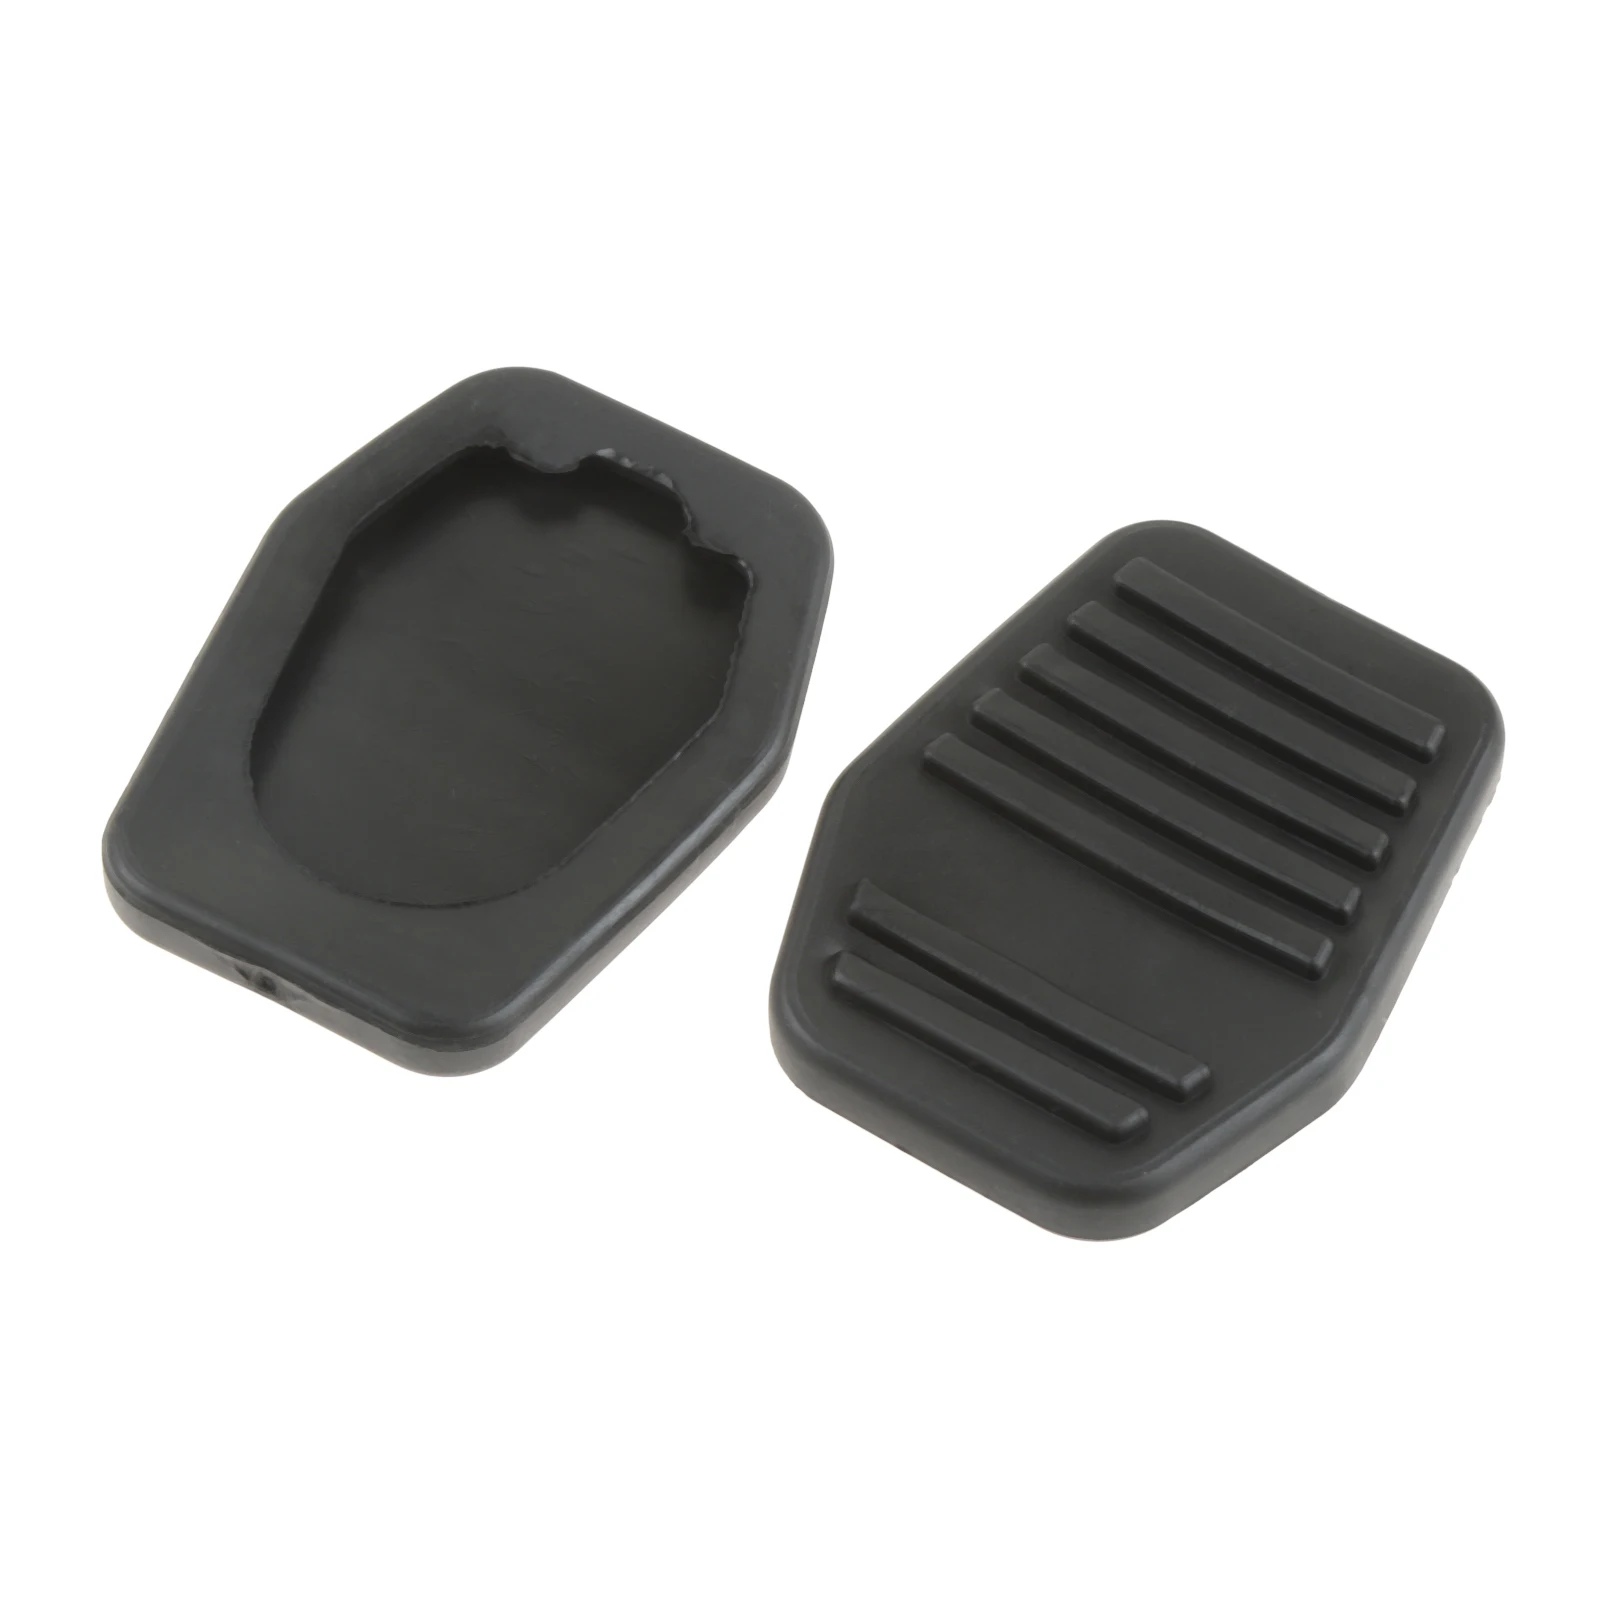 2Pcs Car Rubber Brake Clutch Foot Pedal Pad Covers 6789917 for Ford Coug... - $15.04